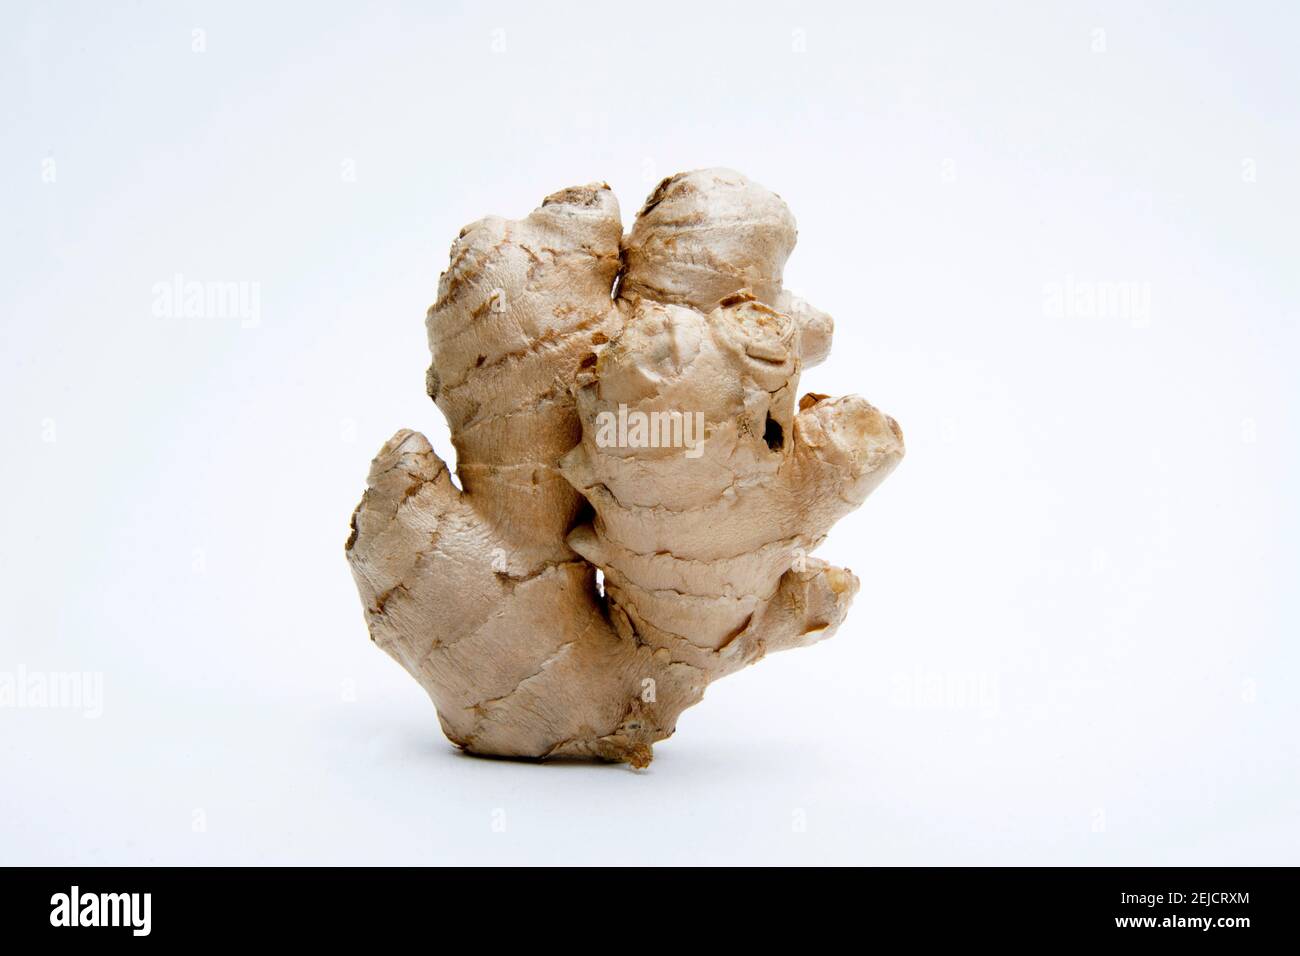 Ginger root on white background Stock Photo